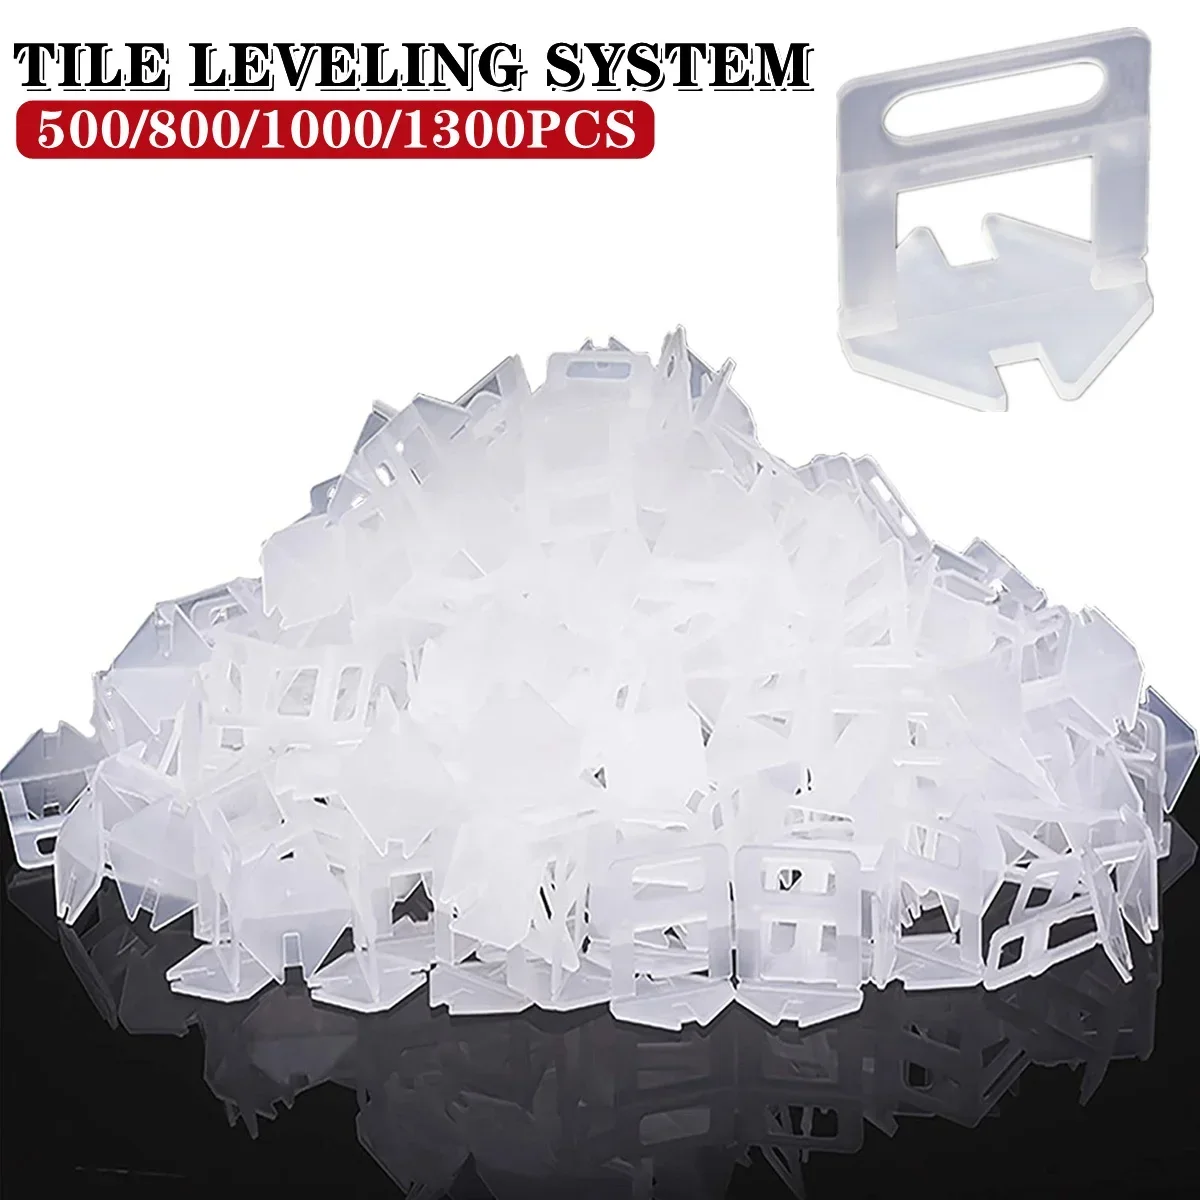 Tile Leveling System Clips 500-1300Pcs Tile Spacers 1MM-3MM for Ceramic Wall Tile Laying Construction Tools  Leveler Spacers 100pcs tile leveling system plastic tiles leveler spacers reusable positioning wedges ceramic tile laying construction tools